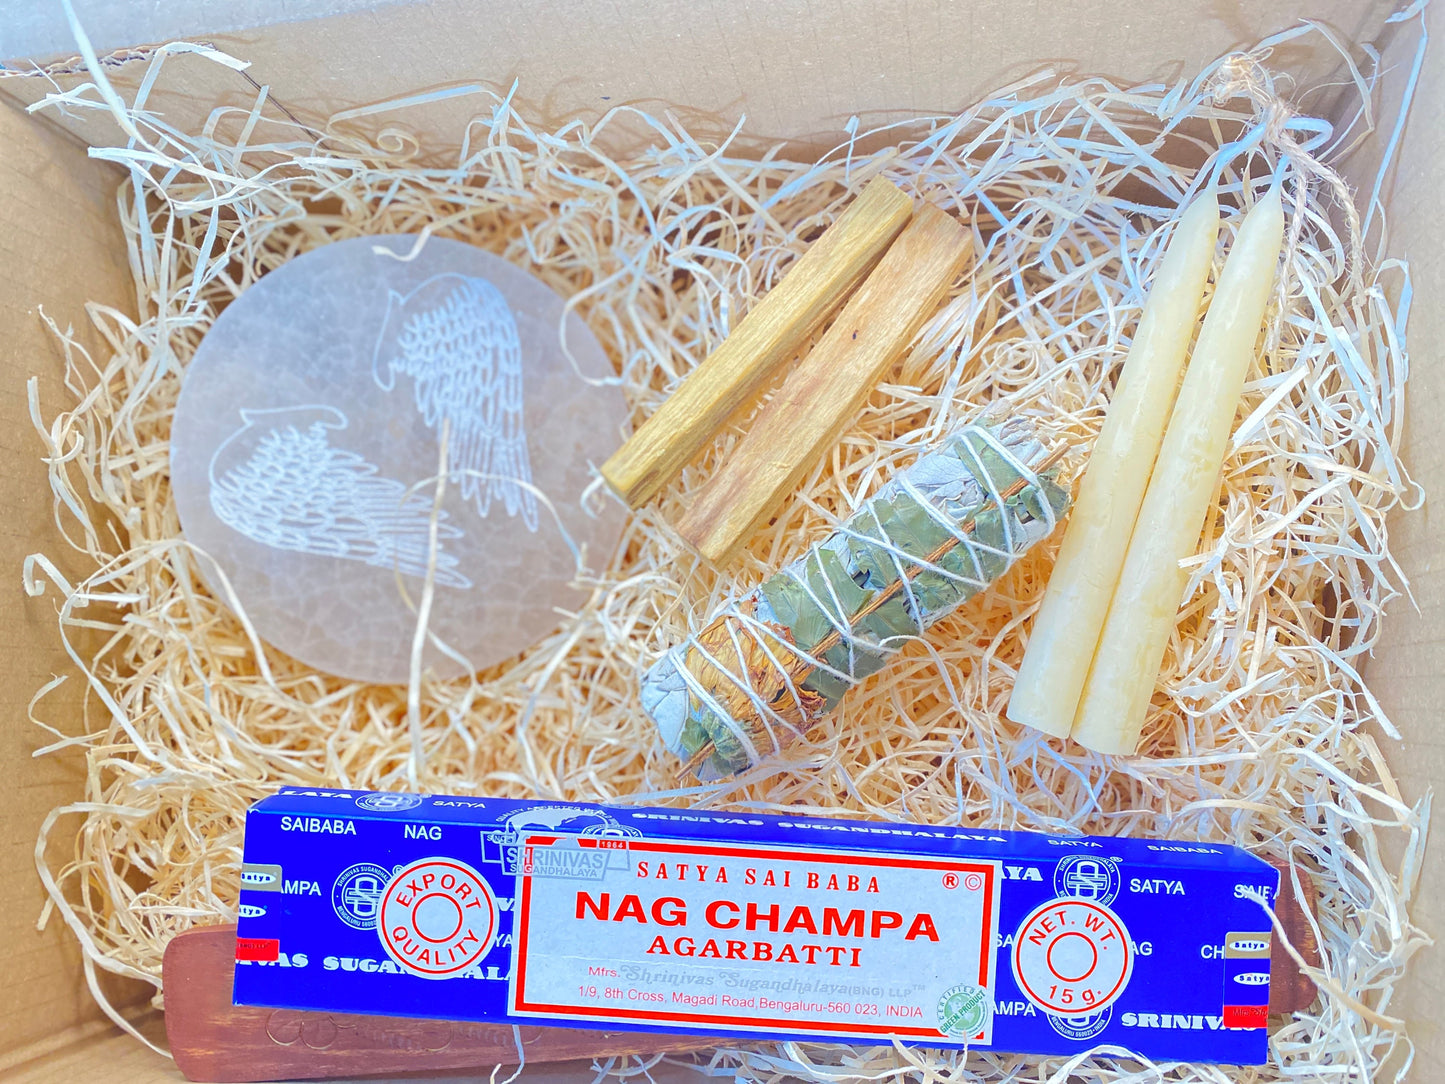 Crystal Cleansing kit, Home Cleansing Smudge Kit, New Home Gift, Energy Cleansing, White Sage, Palo Santo, Selenite, Nag Champa Incense